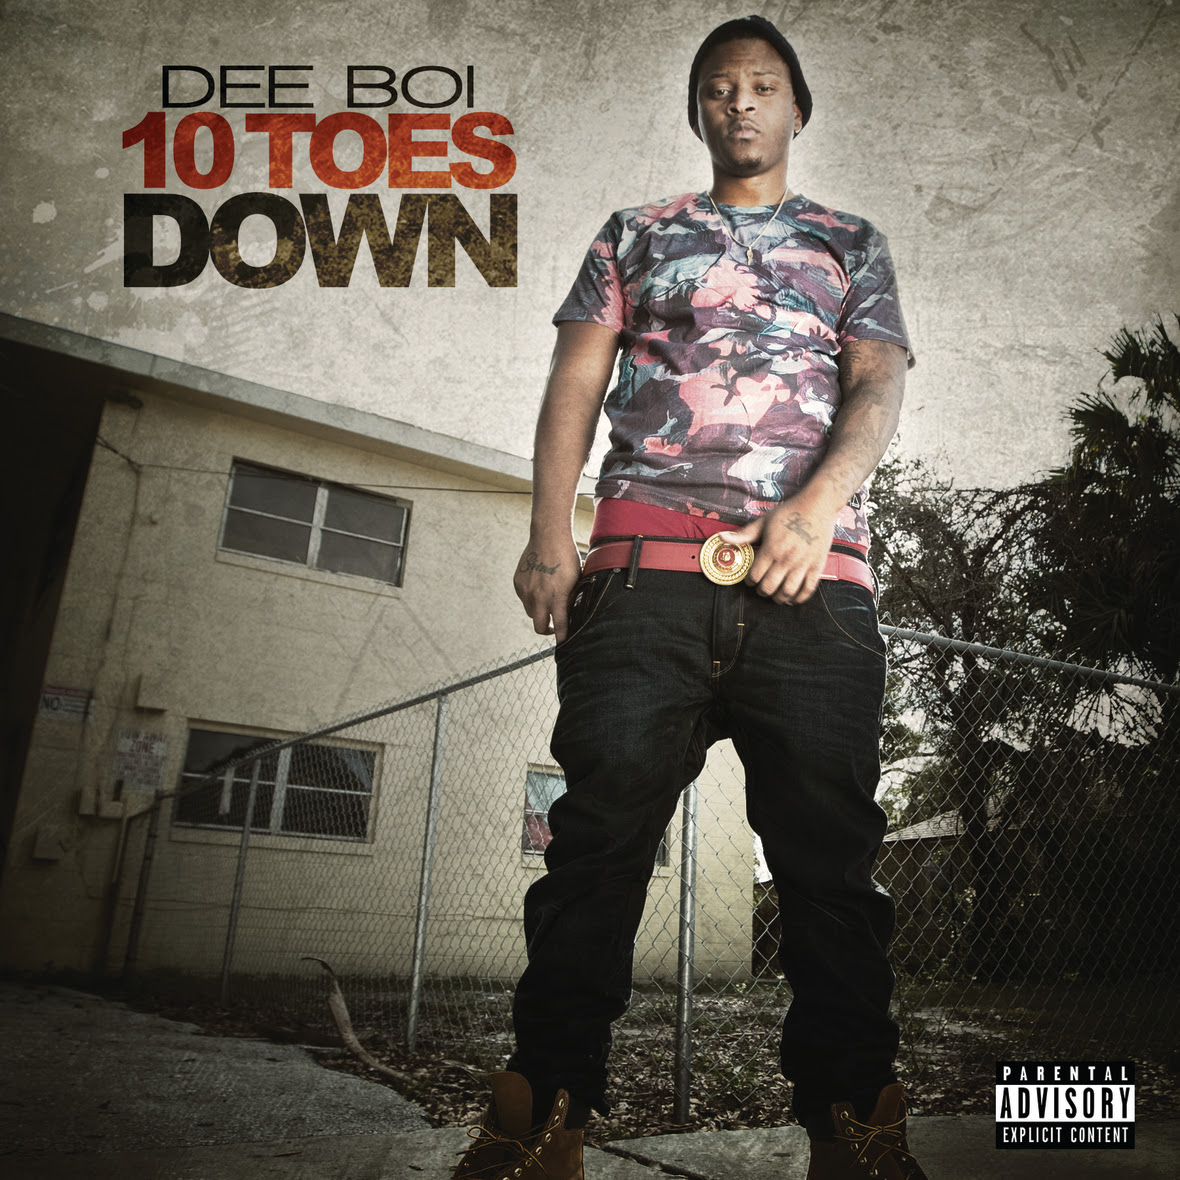 Dee Boi 10 Toes Down Mixtape Cover